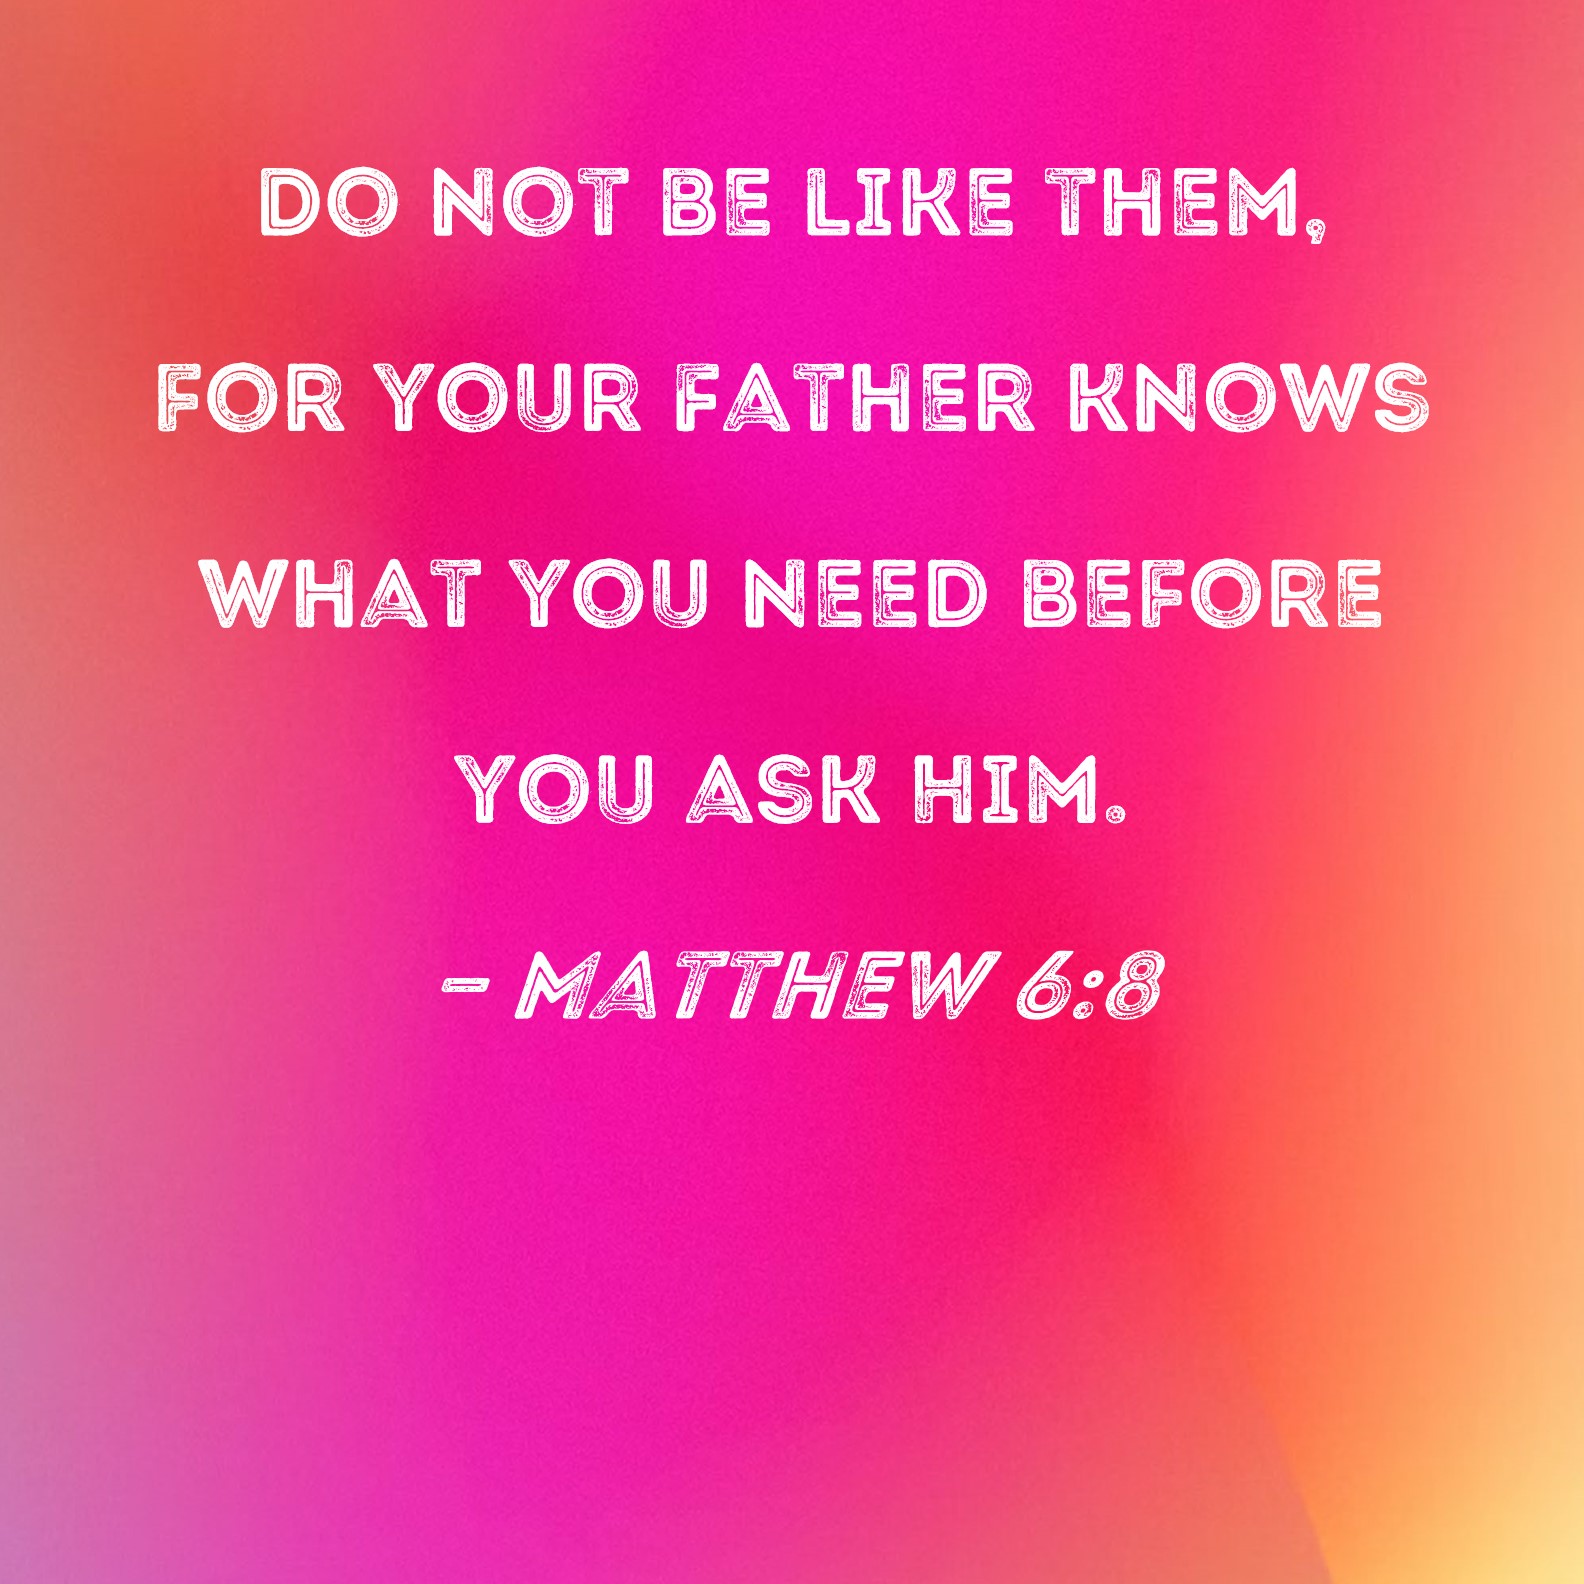 matthew-6-8-do-not-be-like-them-for-your-father-knows-what-you-need